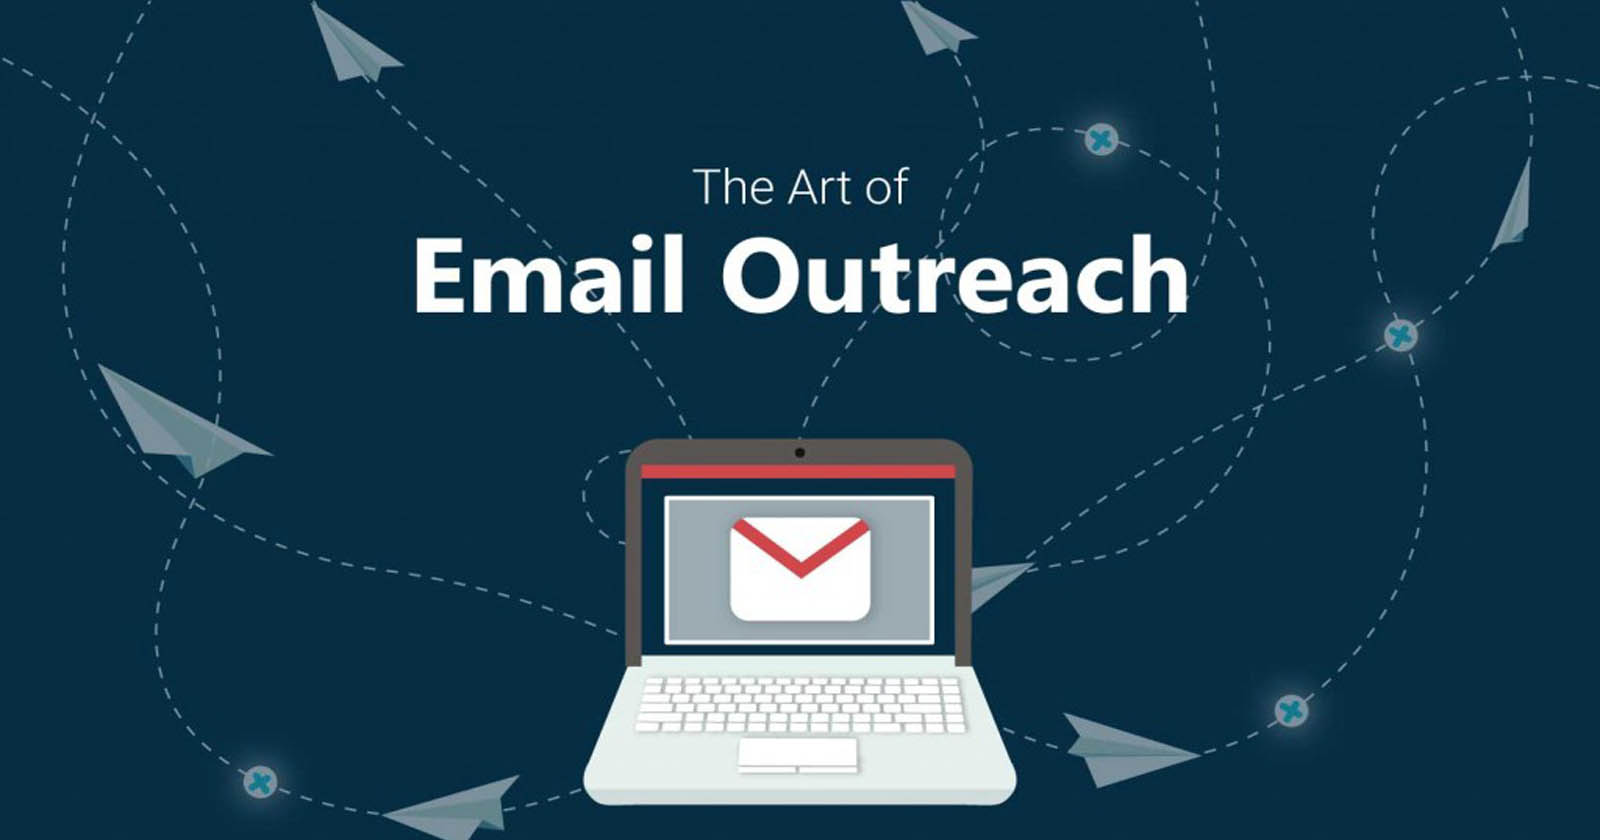 Email Outreach